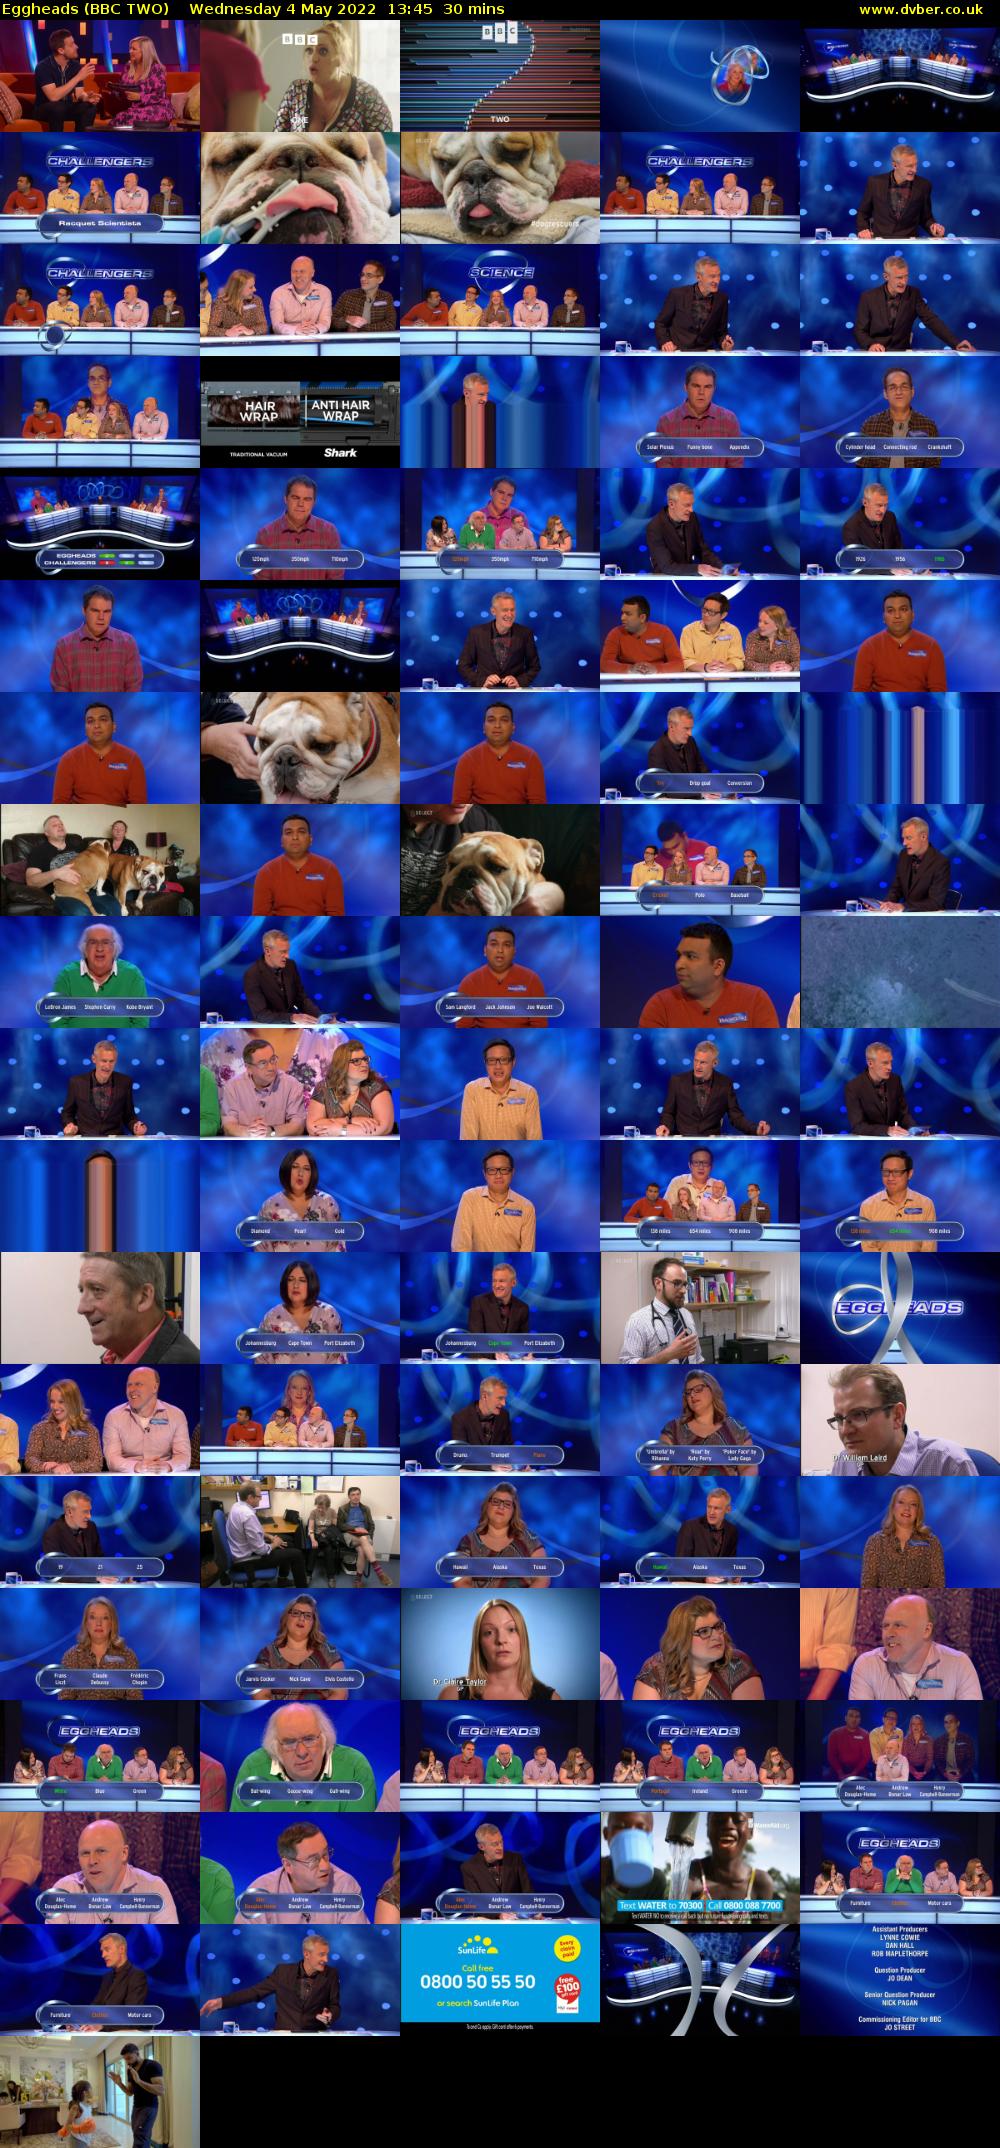 Eggheads (BBC TWO) Wednesday 4 May 2022 13:45 - 14:15